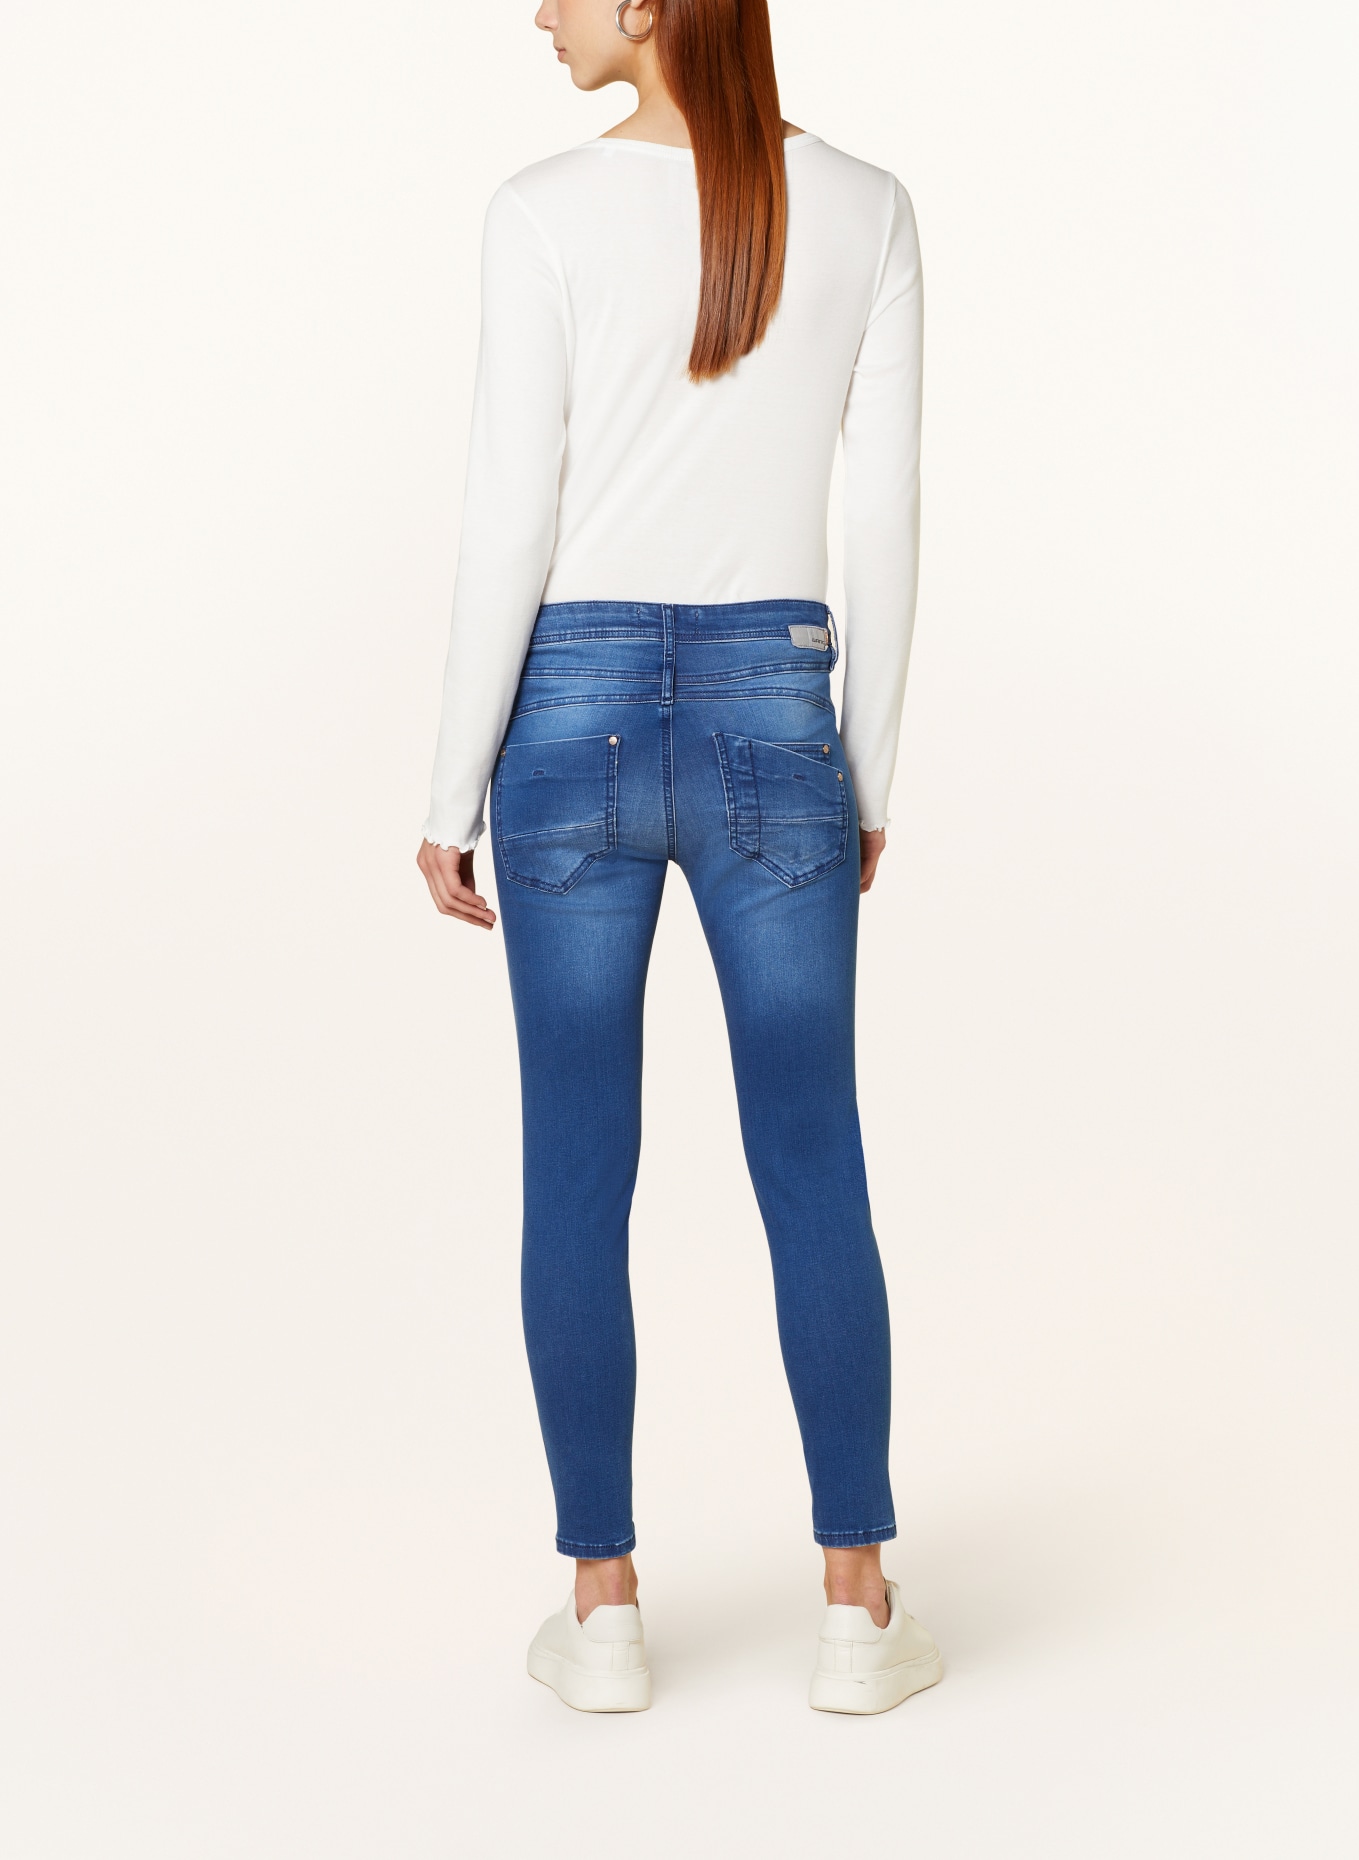 GANG Jeans AMELIE, Farbe: 7760 clam blue (Bild 3)